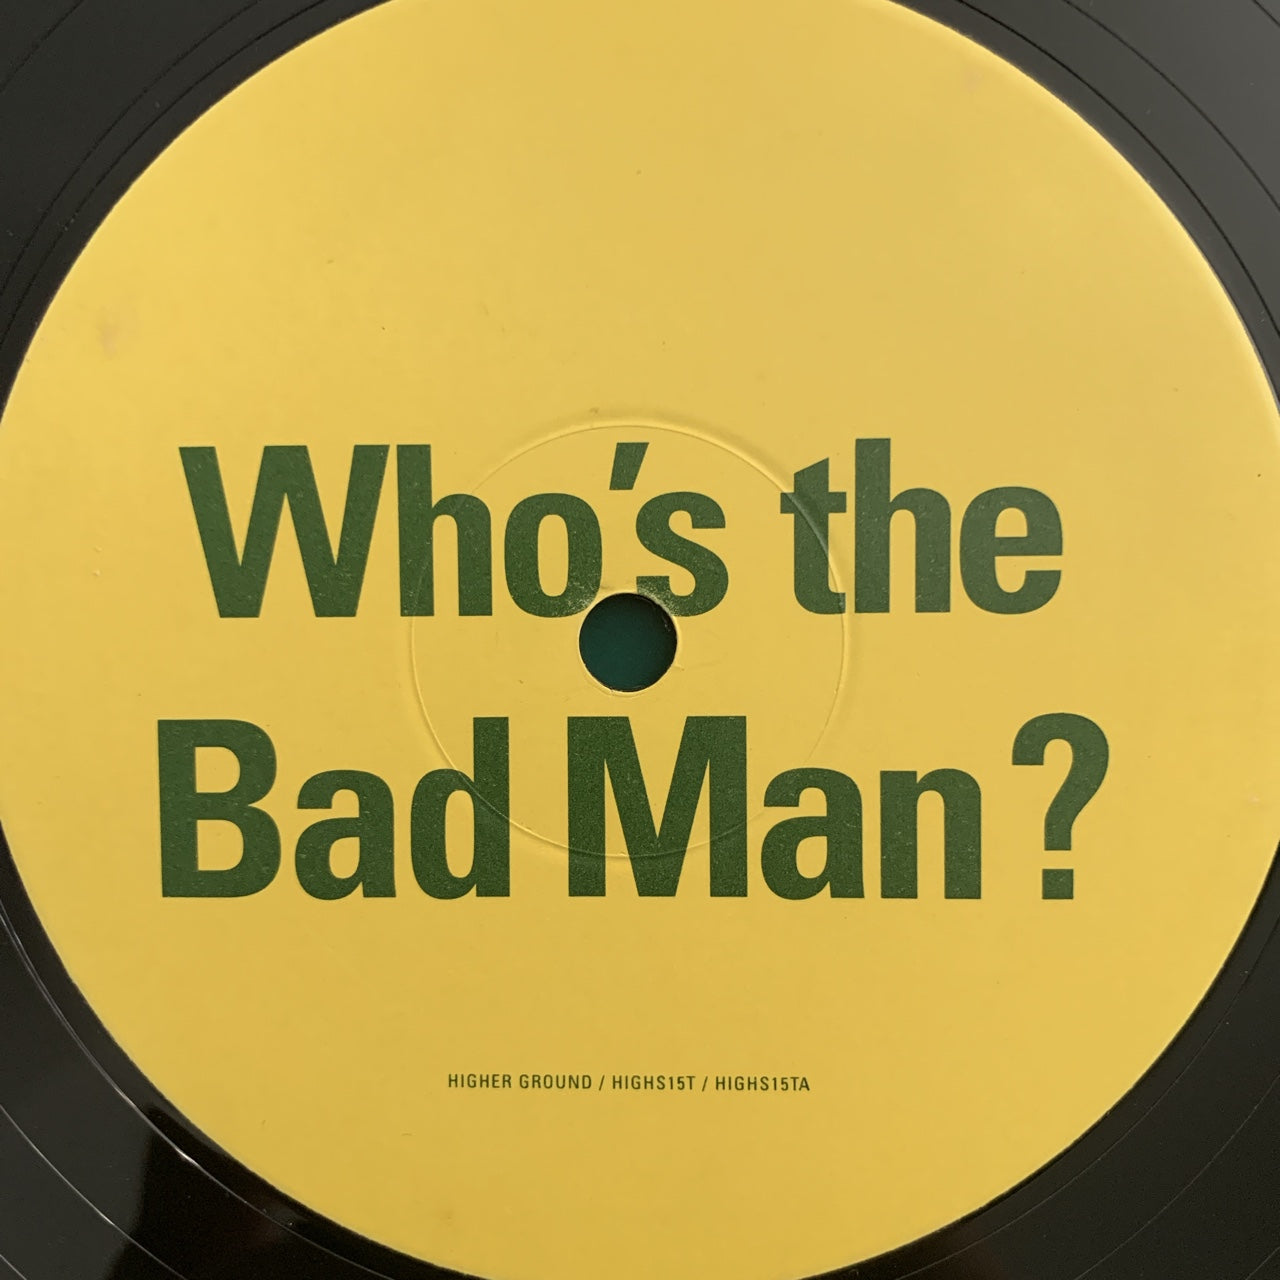 Dee Patten “Who’s the Bad Man?”